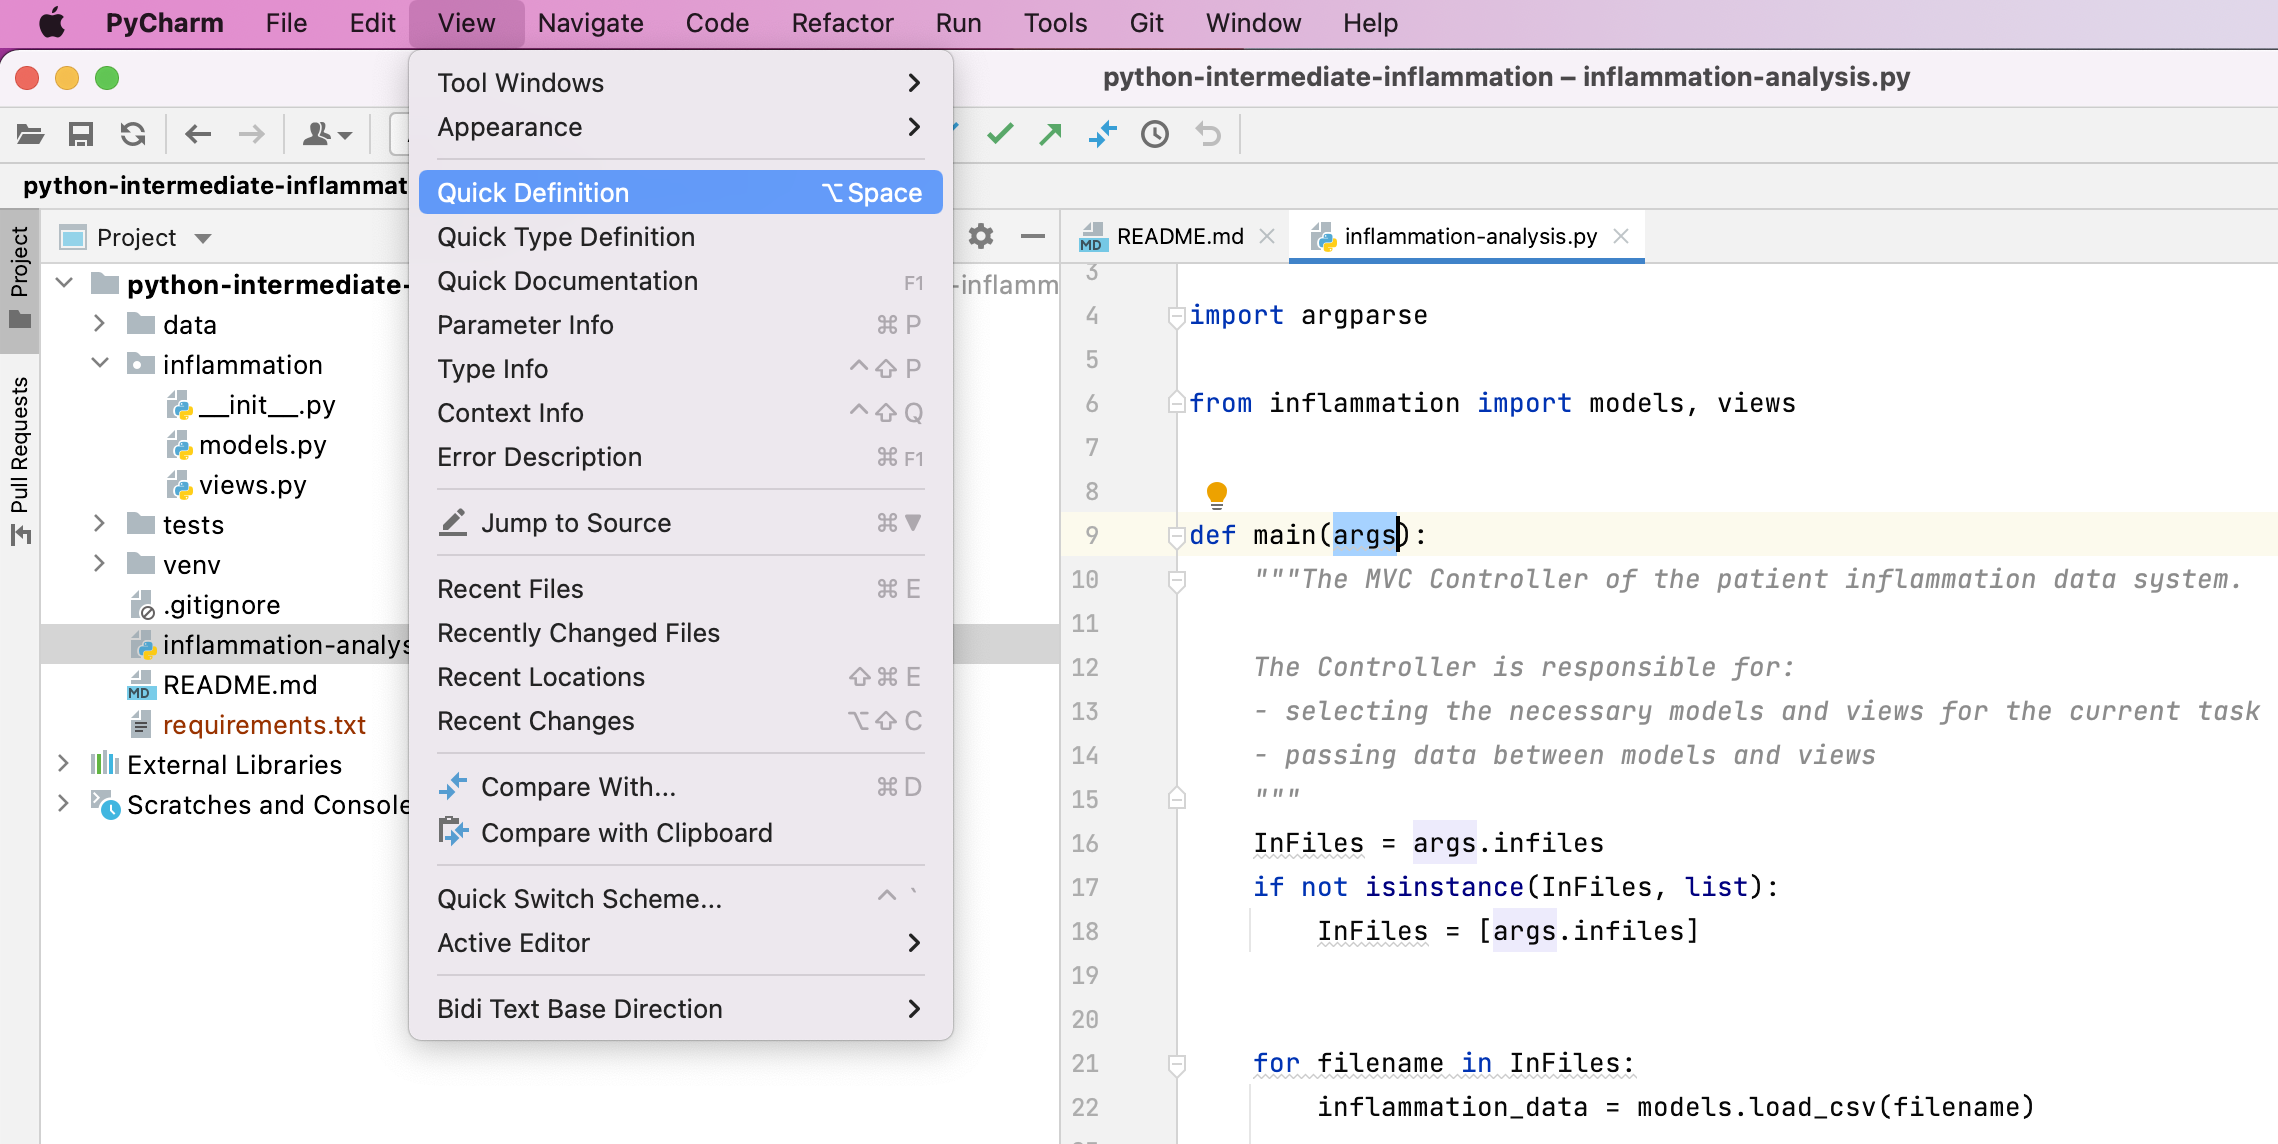 Code References Functionality in PyCharm